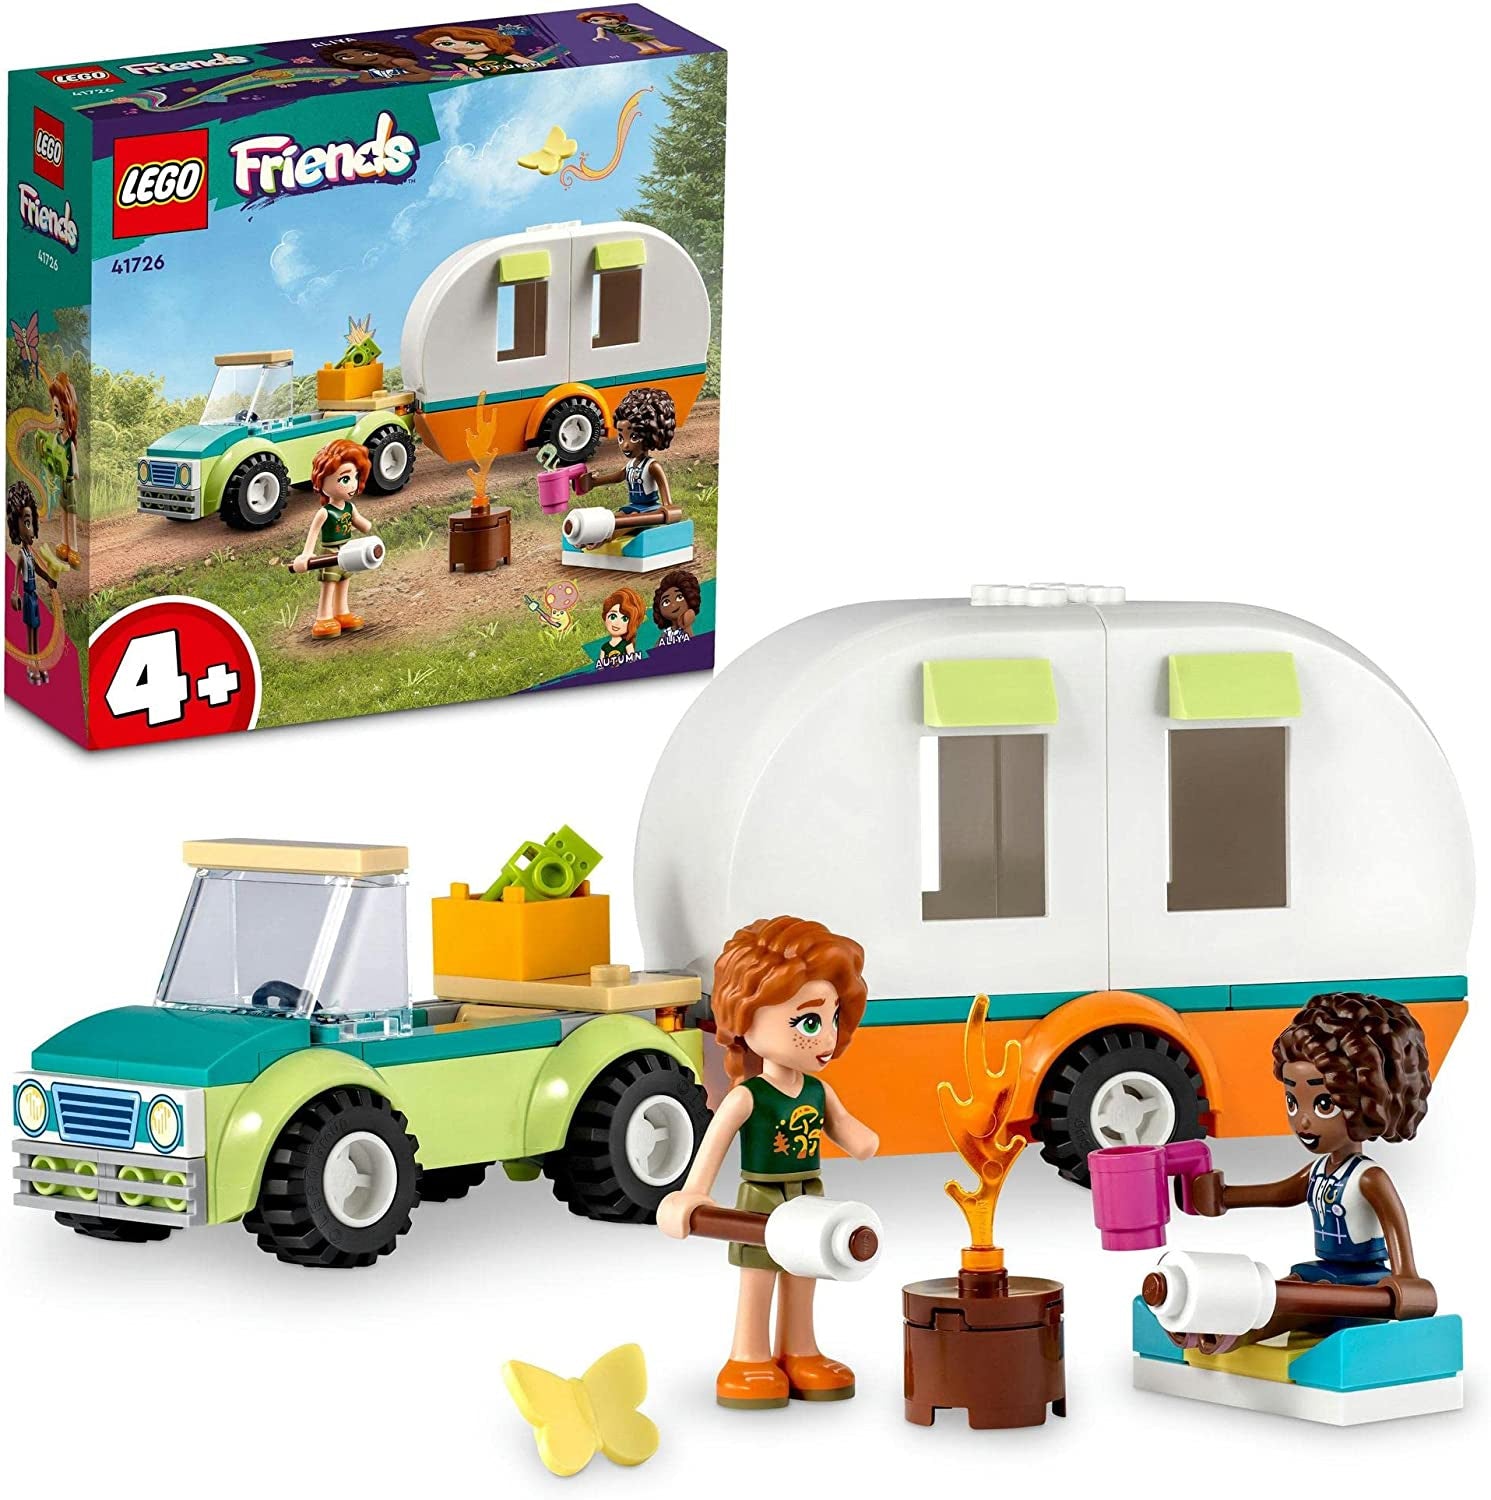 LEGO Friends Holiday Camping Trip 41726 RRP $33